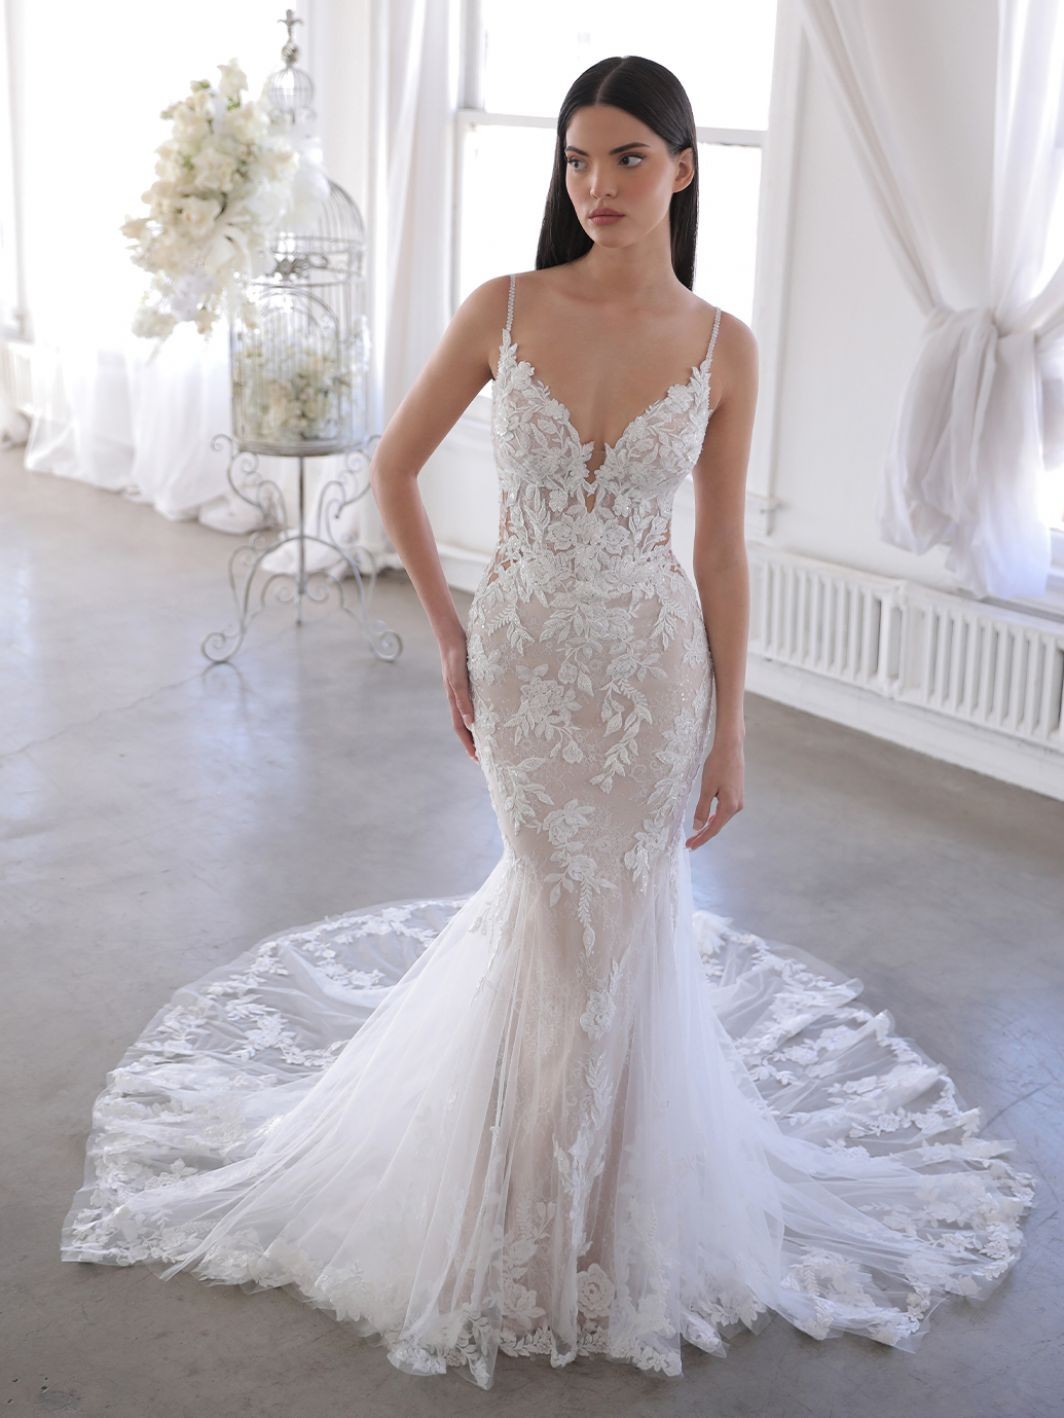 Olana Bridal Dress Inspirated By Blue By Enzoani 2022 of Enzoani